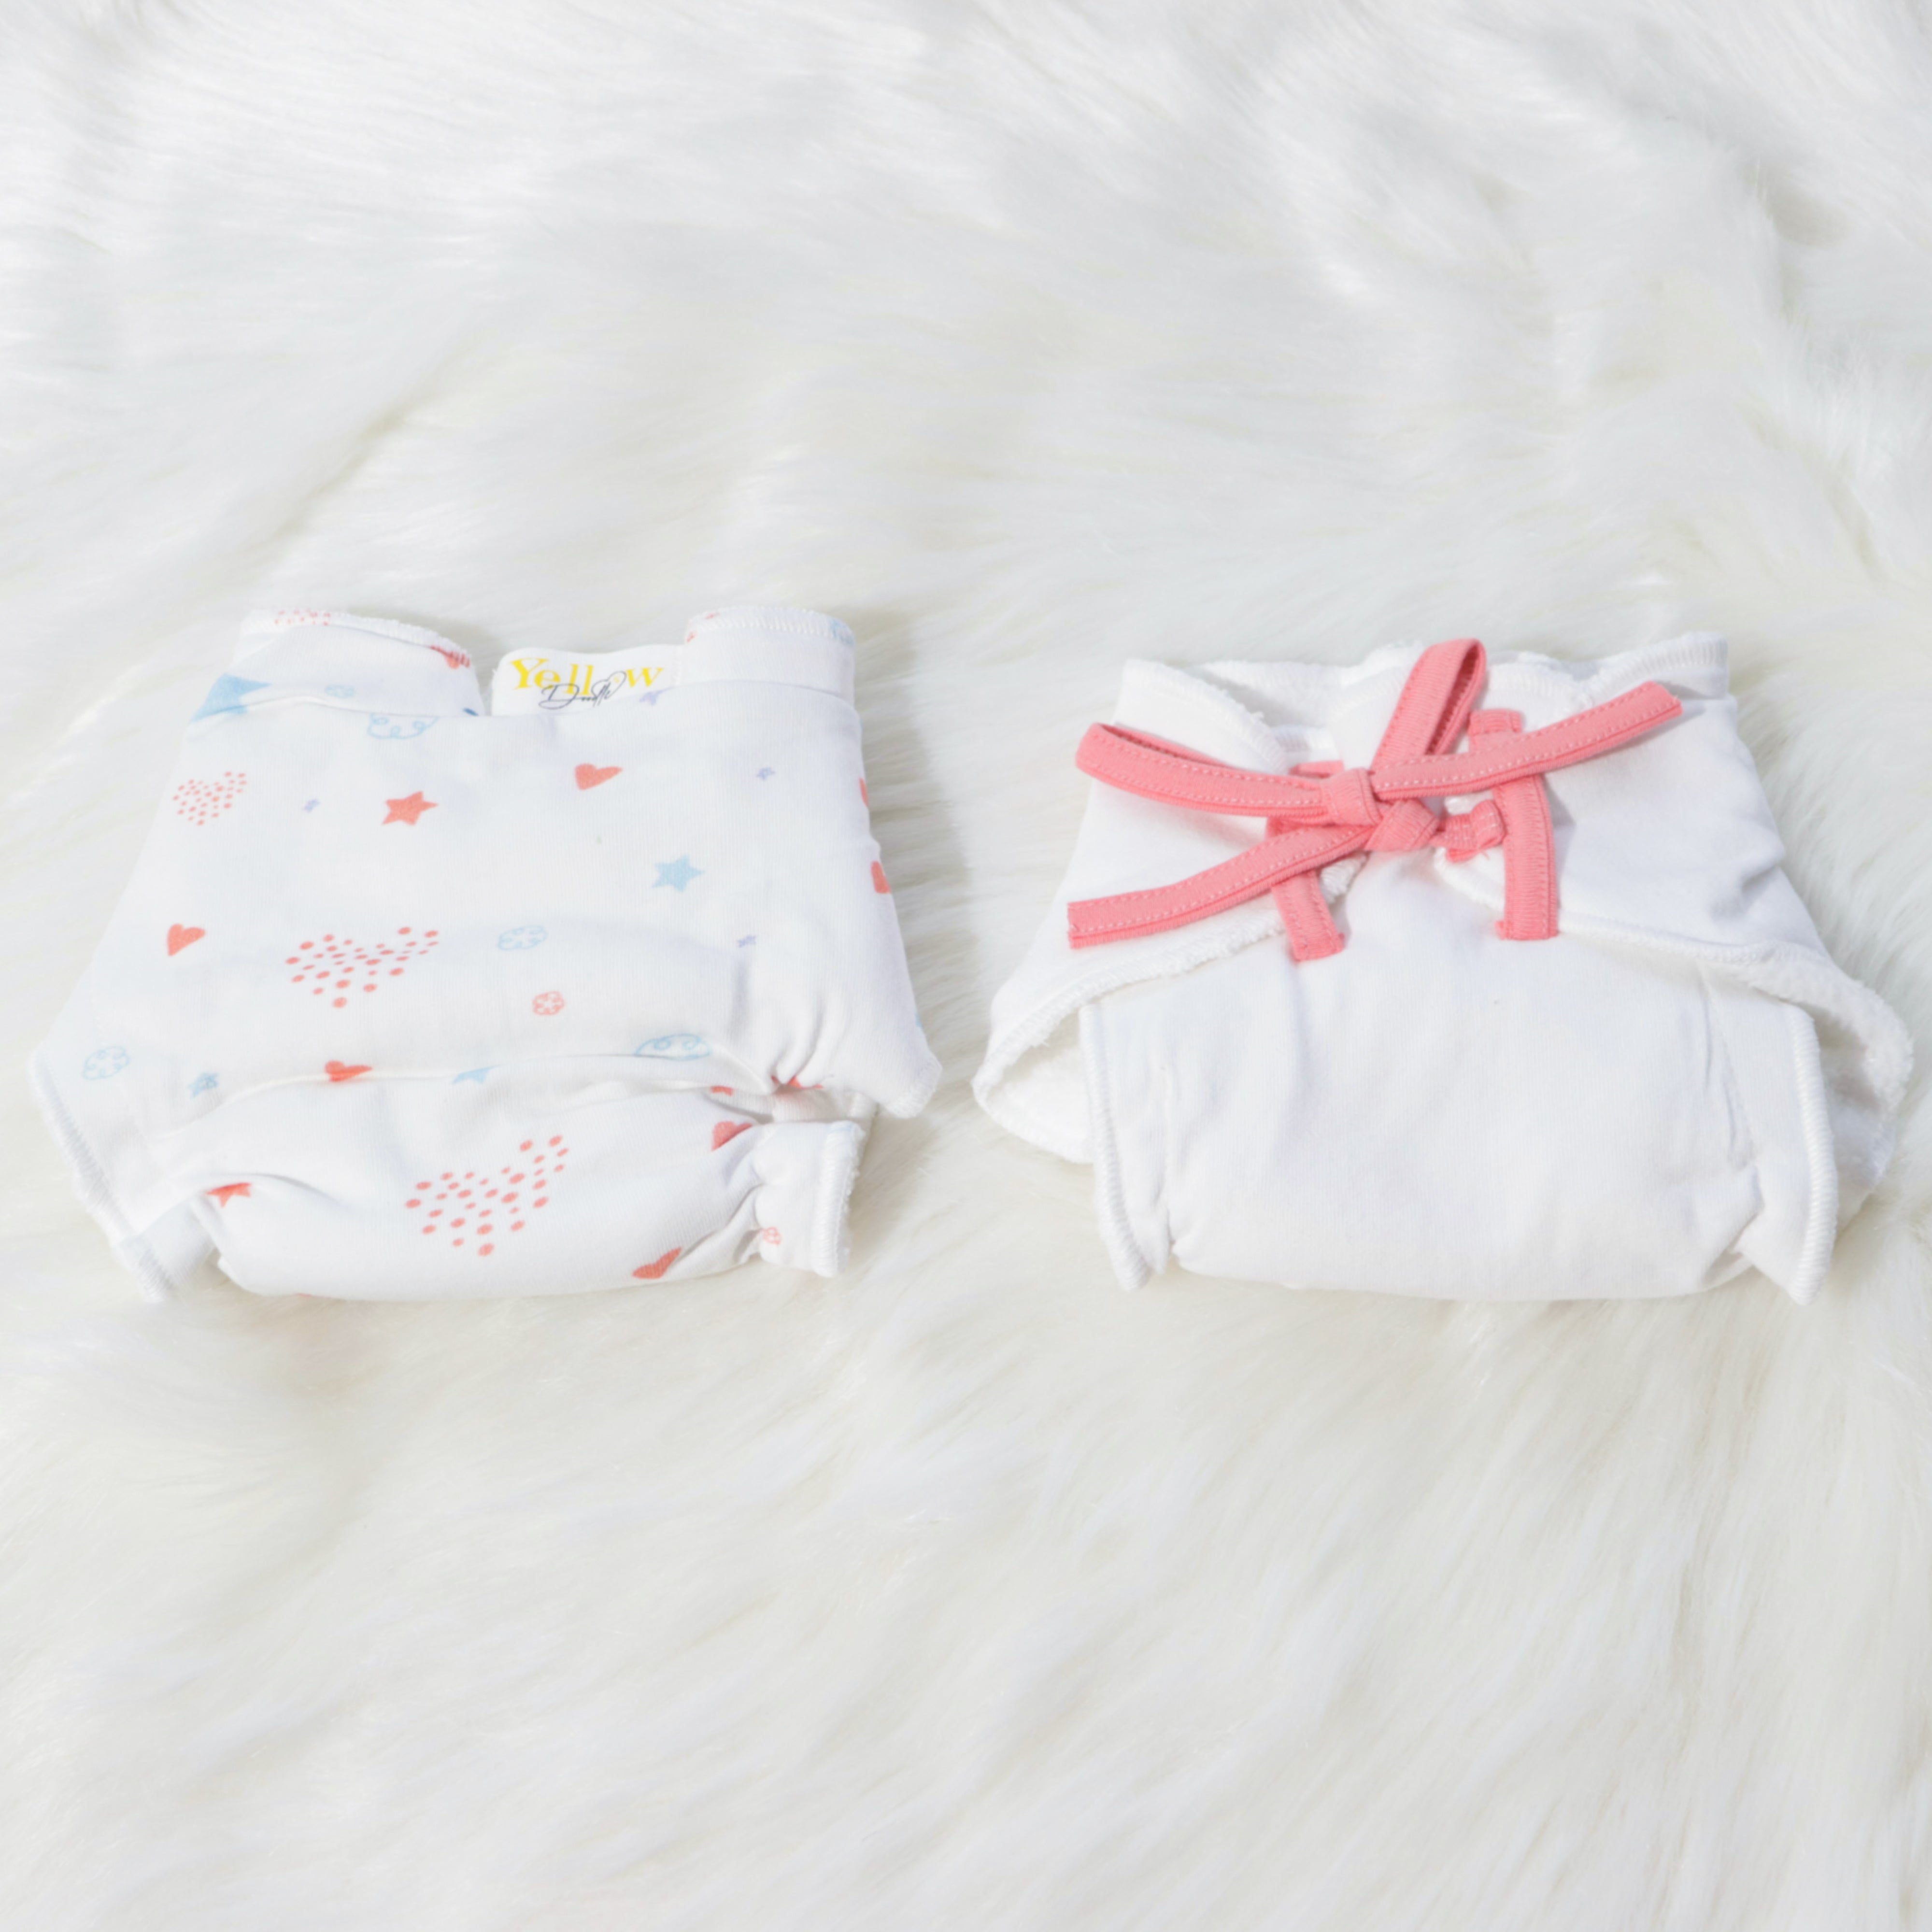 Fairy Dust - Everyday Essentials Nappy & Vest (Set of 4)